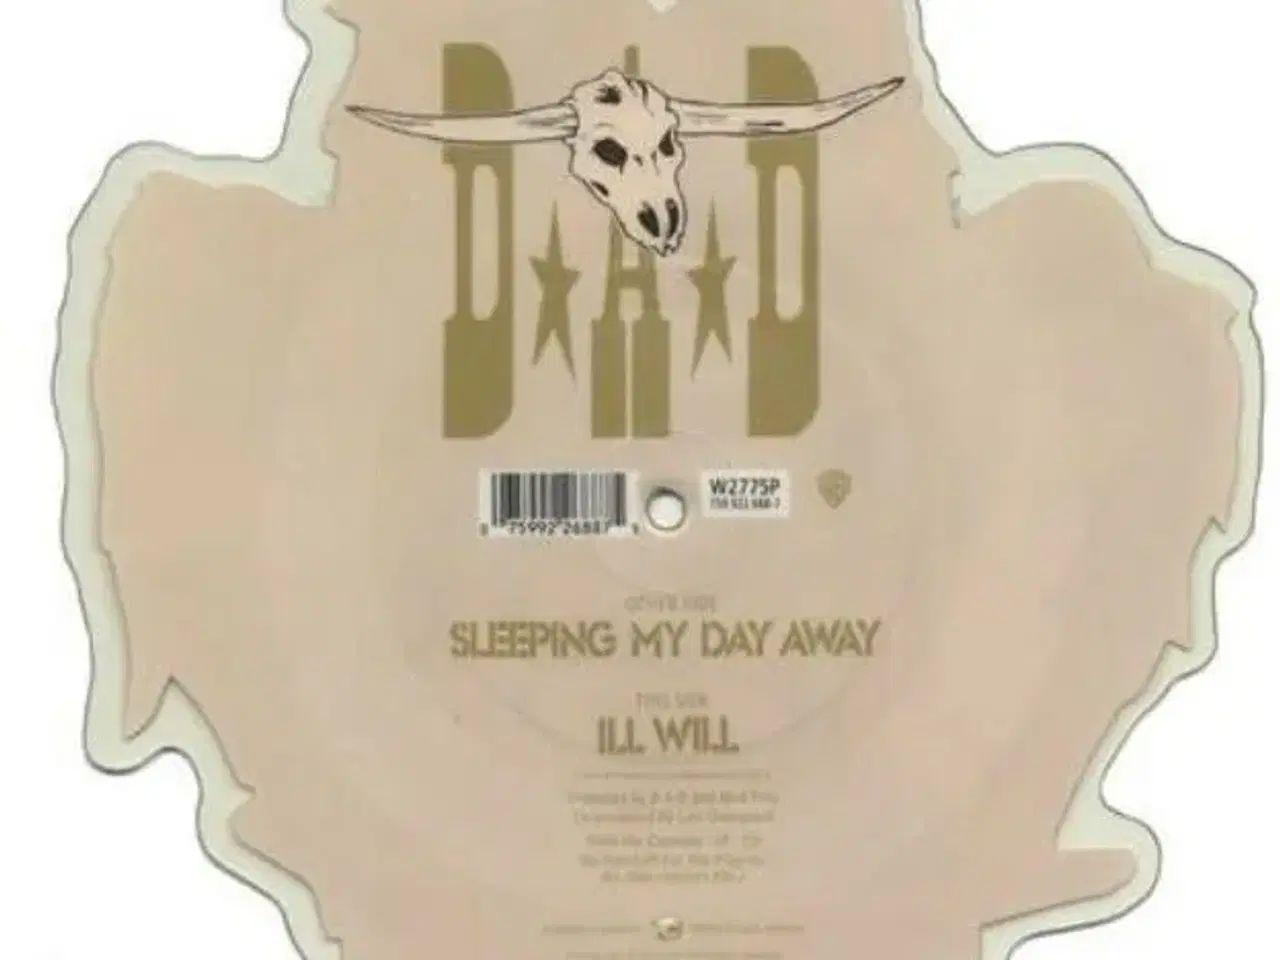 Billede 2 - DAD - Sleeping My Day Away - Picture Disc